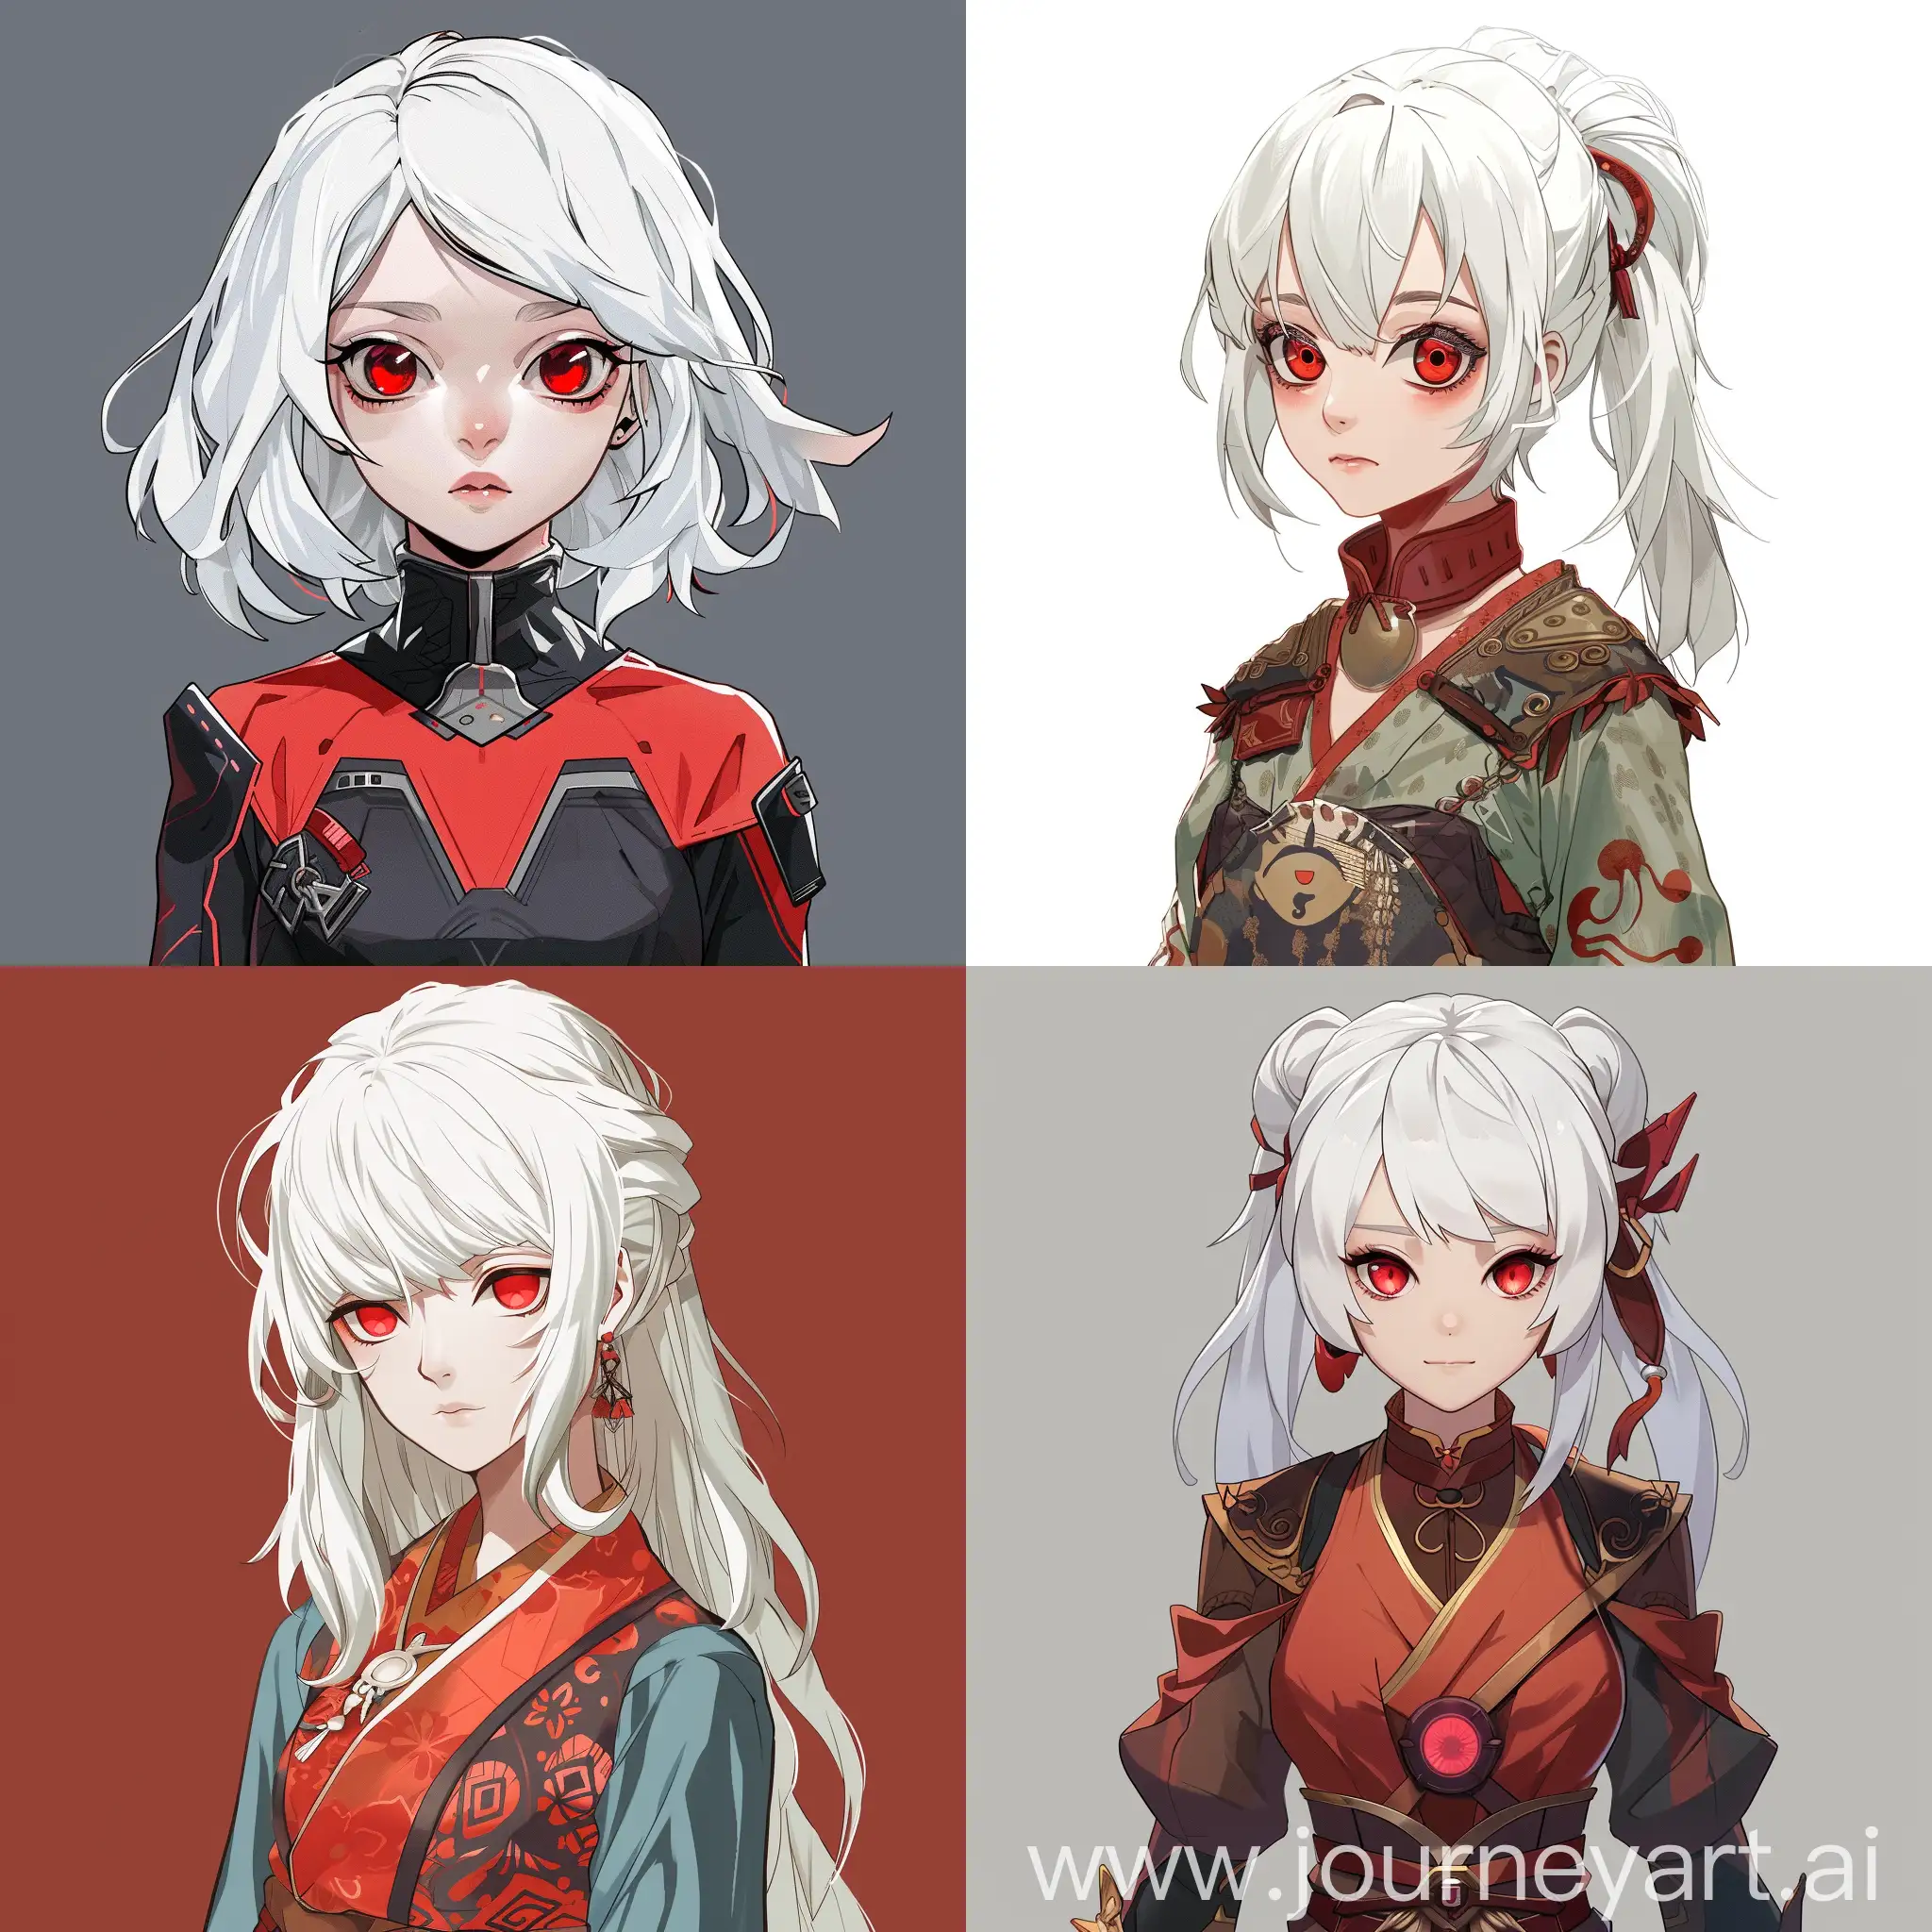 Mystical-WhiteHaired-Girl-with-Red-Eyes-in-Unique-Attire